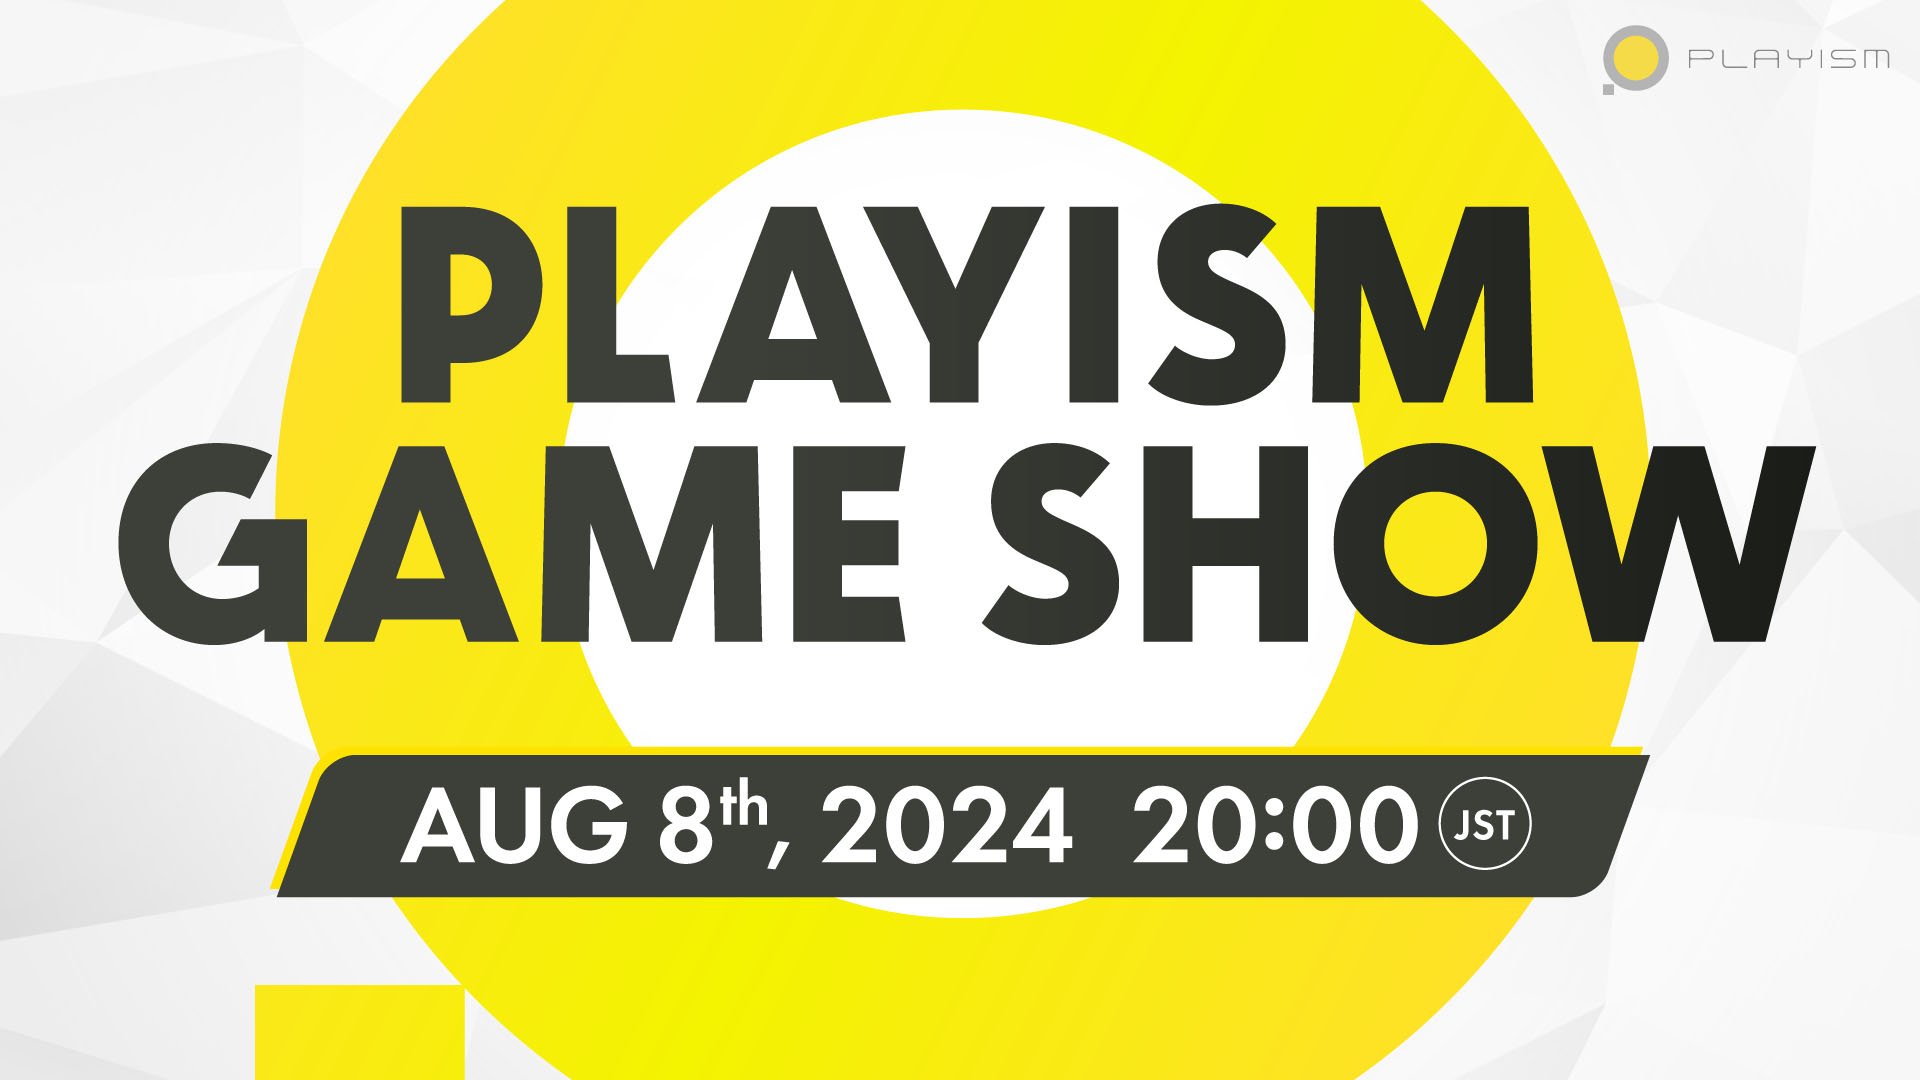 PLAYISM Game Show: August 8, 2024